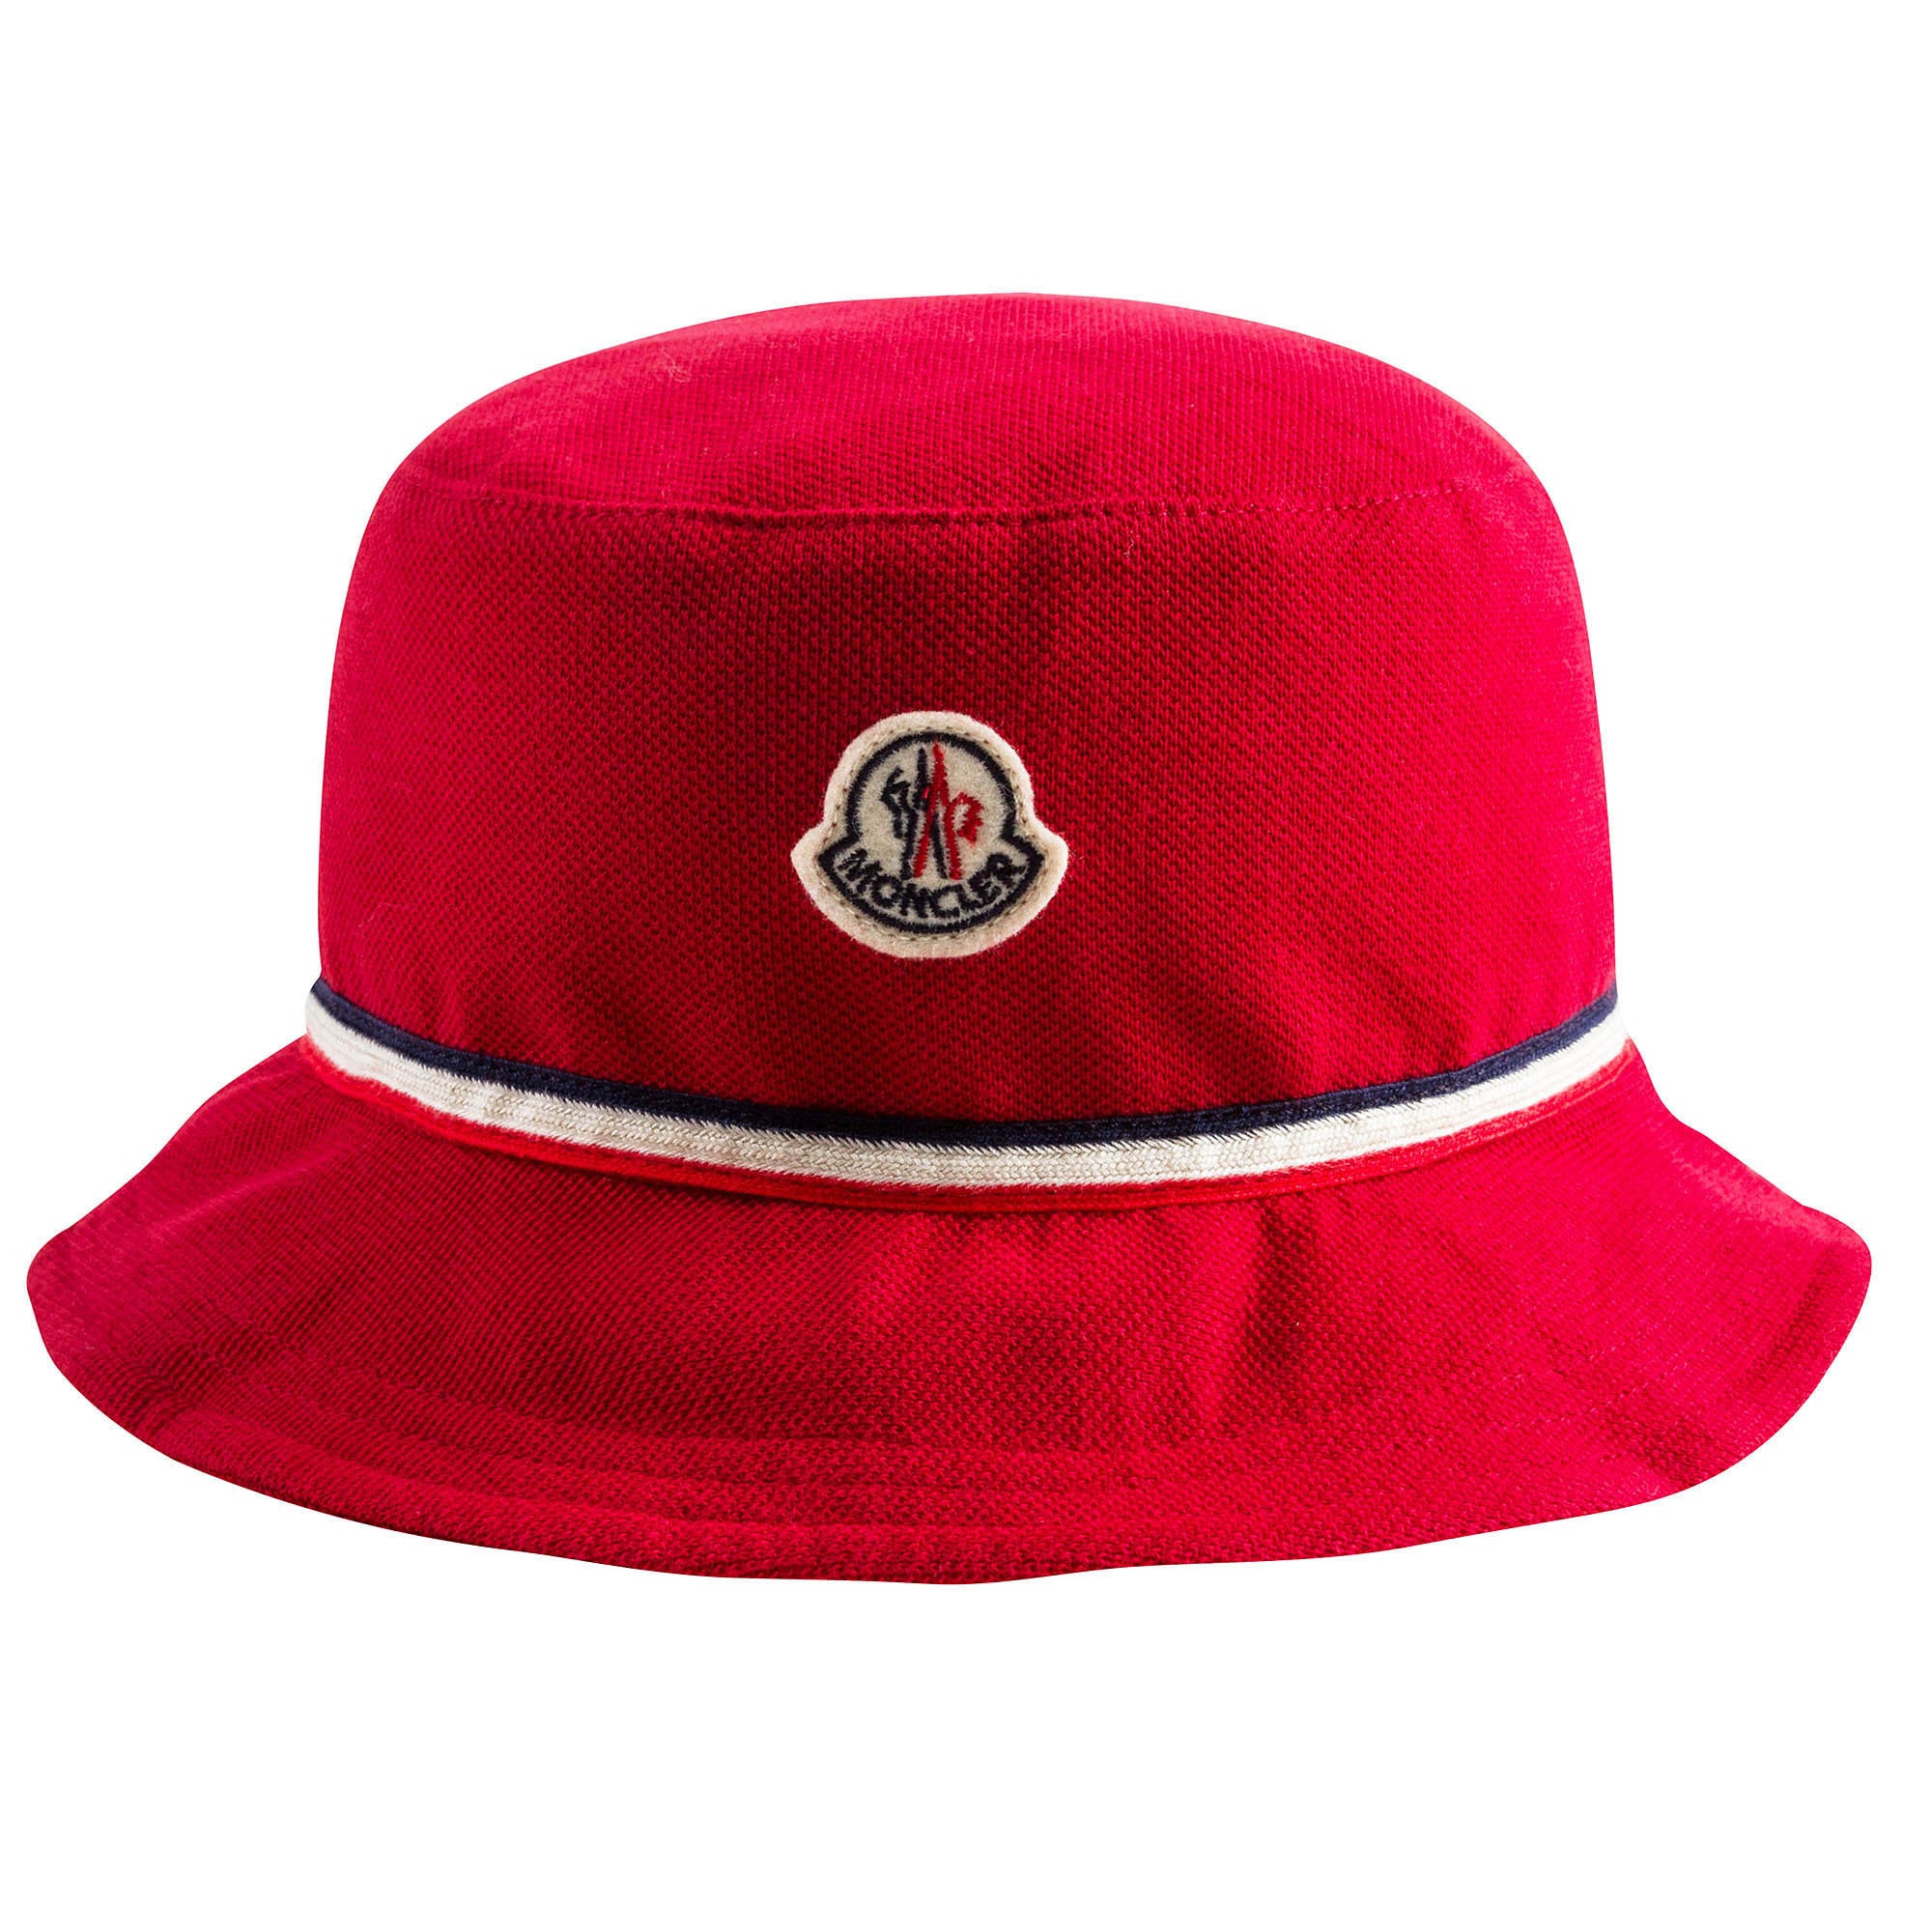 Baby Red Sun Hat With Striped Trims